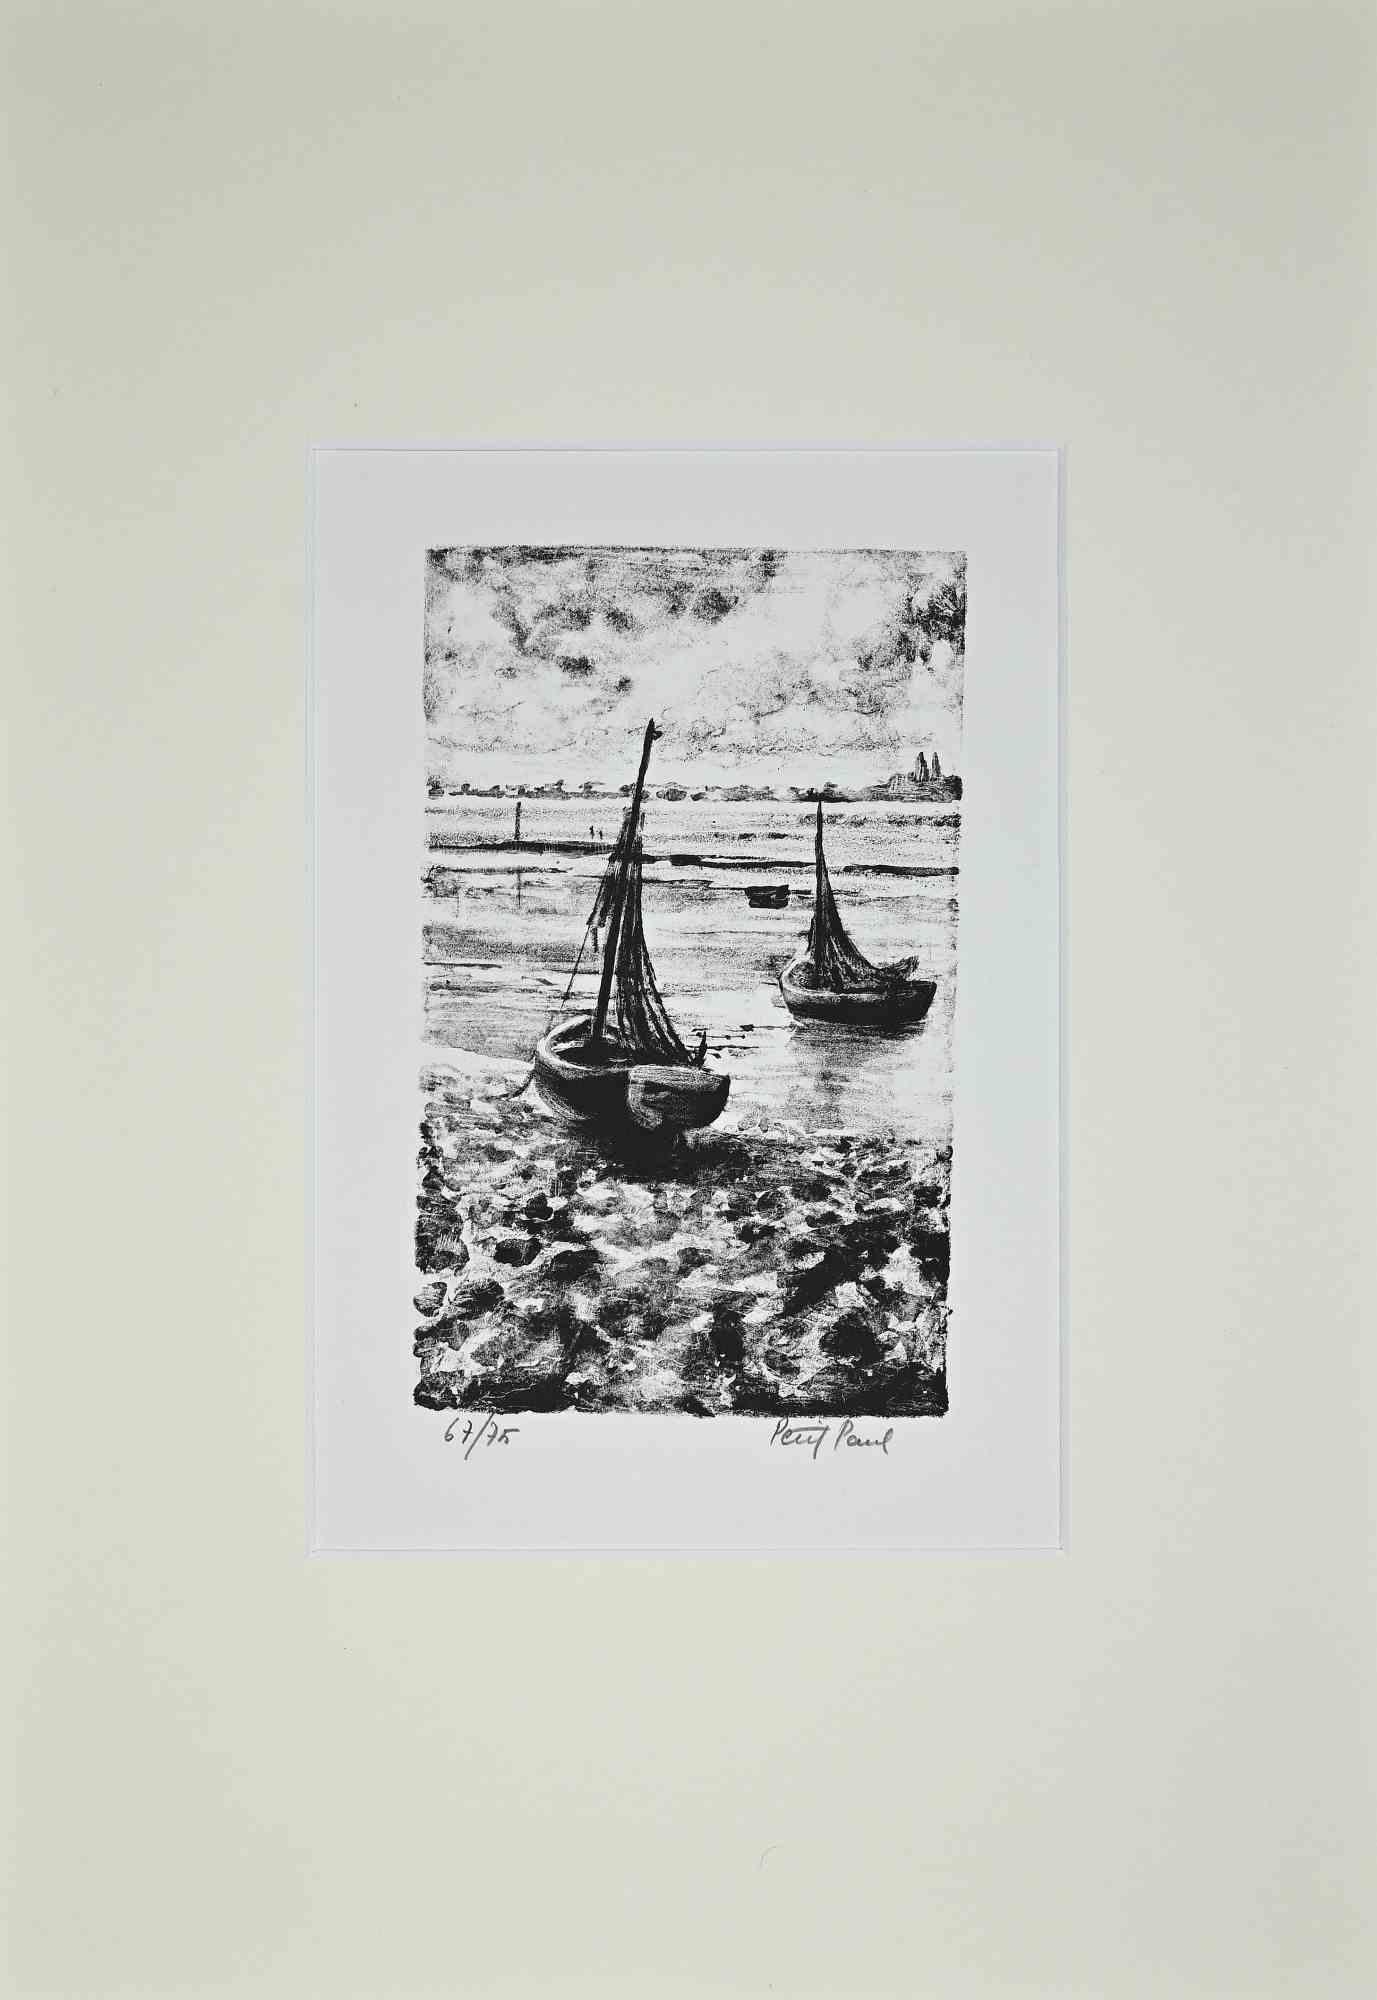 Boats is an original lithograph realized by Paul Petit in the mid-20th Century.

Hand-signed.

Numbered, 67/75

The artwork is depicted through confident strokes in a well-balanced composition.